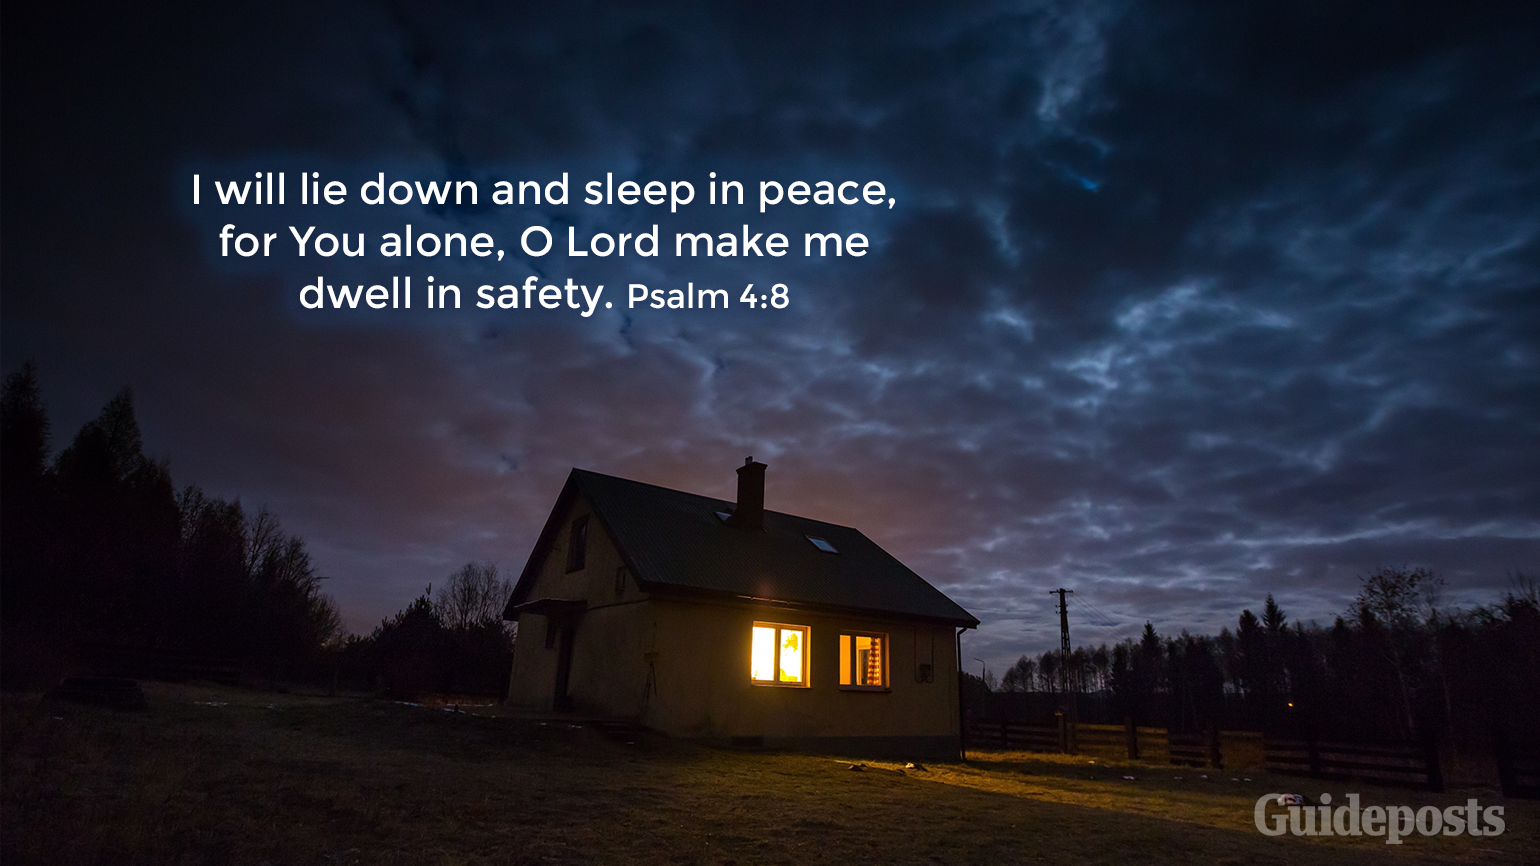 Good Night Bible Verses Images: End Your Day with Peace and Inspiration